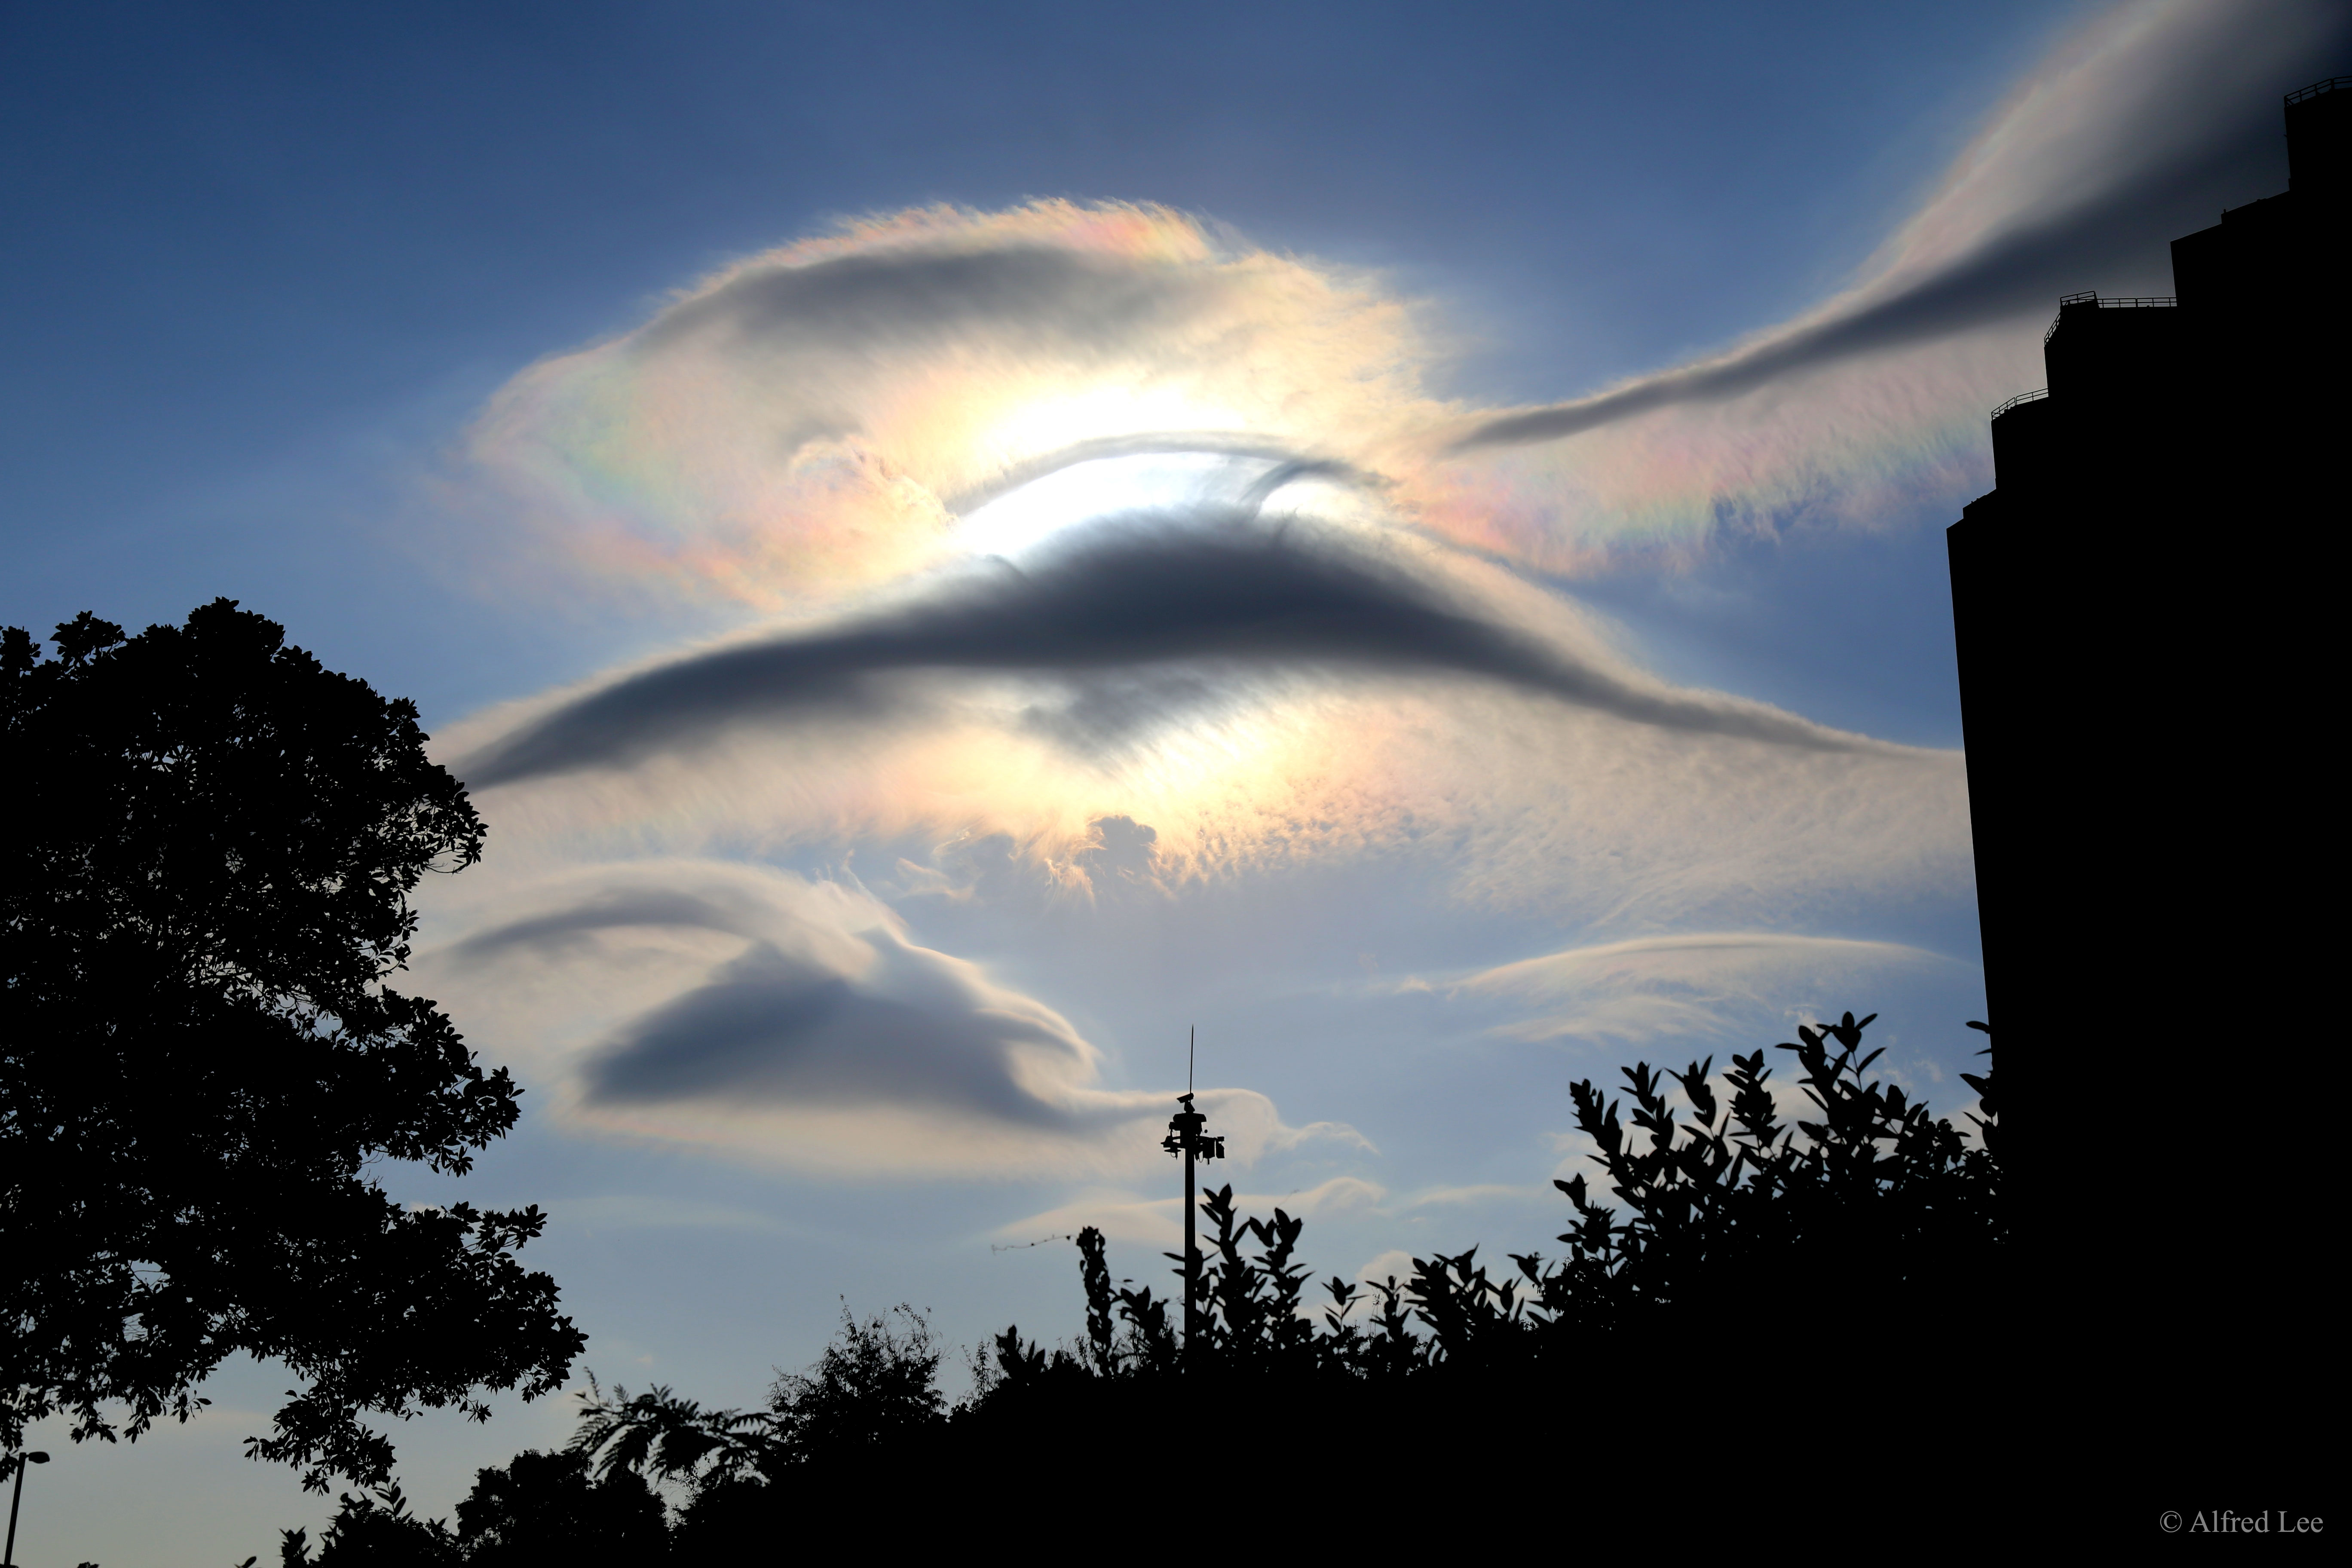 APOD: 2016 March 2 - Unusual Clouds over Hong Kong